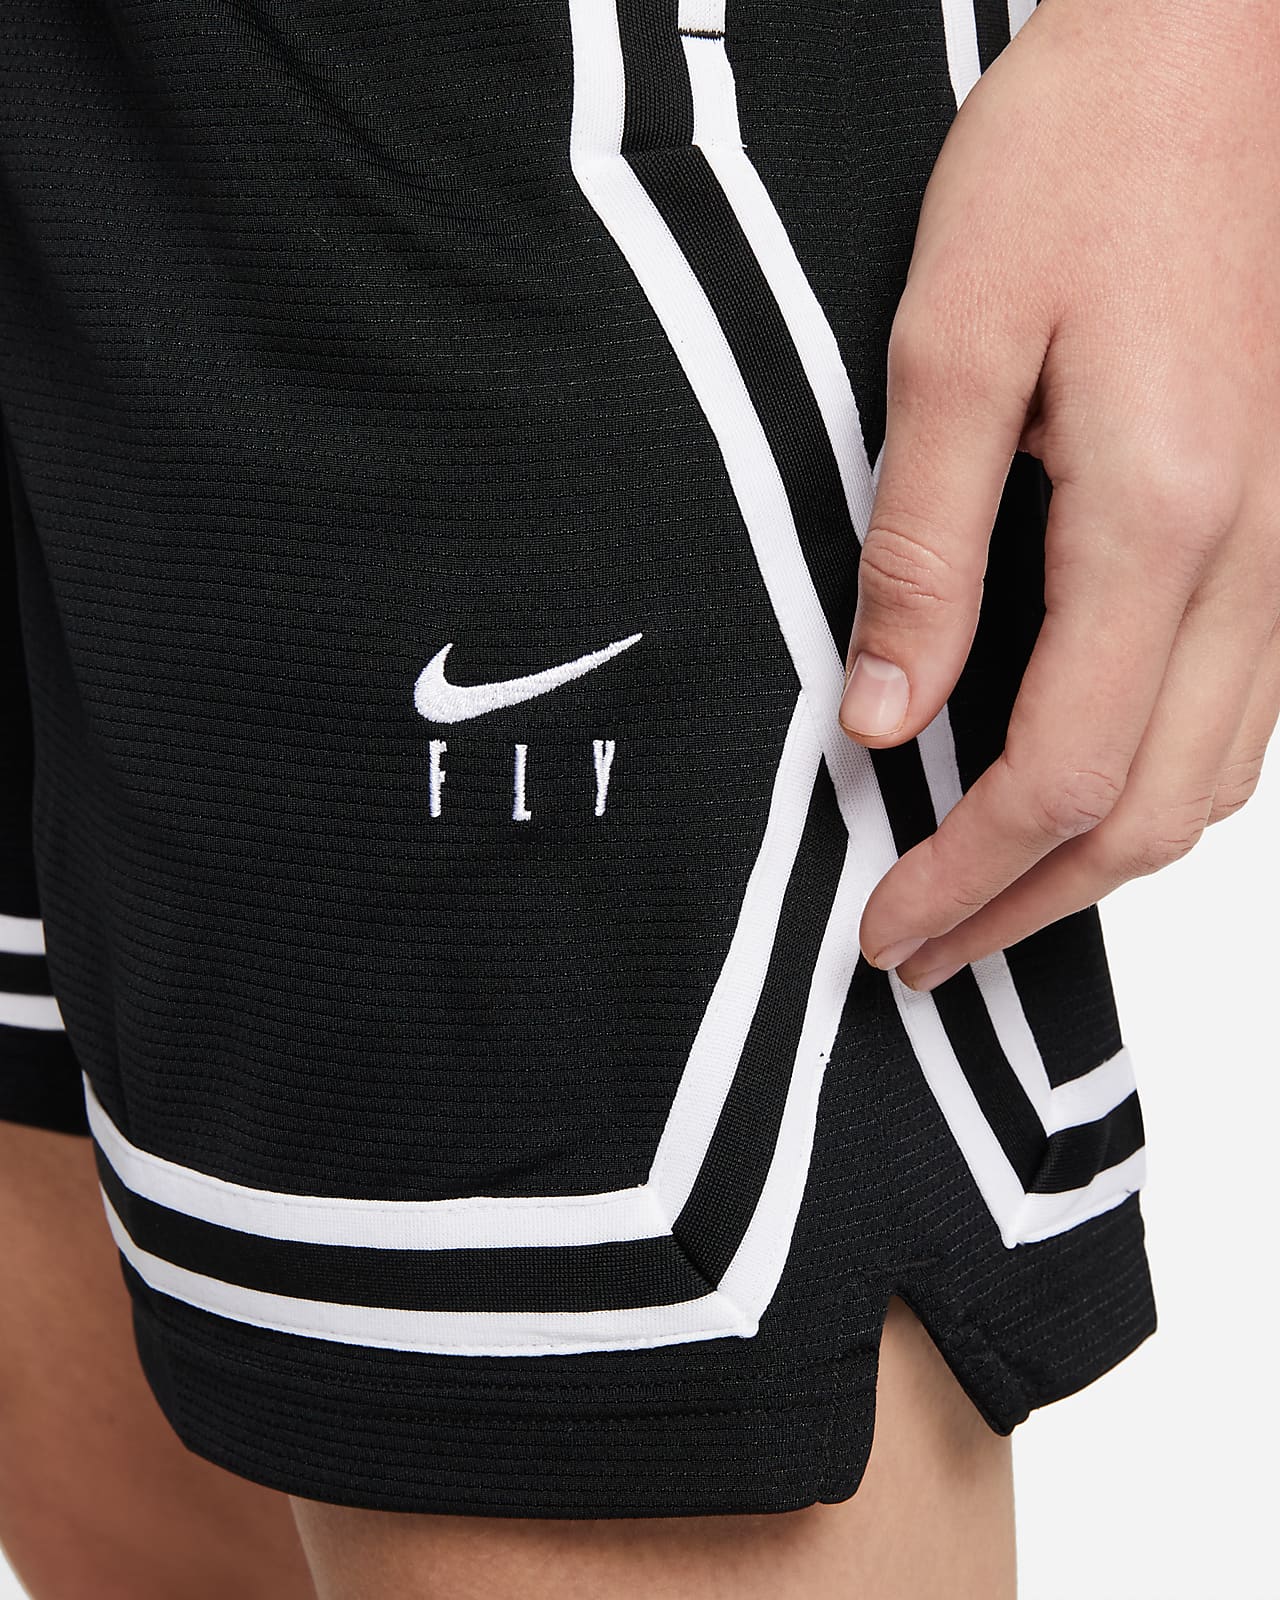 Nike's Swoosh Fly Line Designed to Fit Female Players, Not for